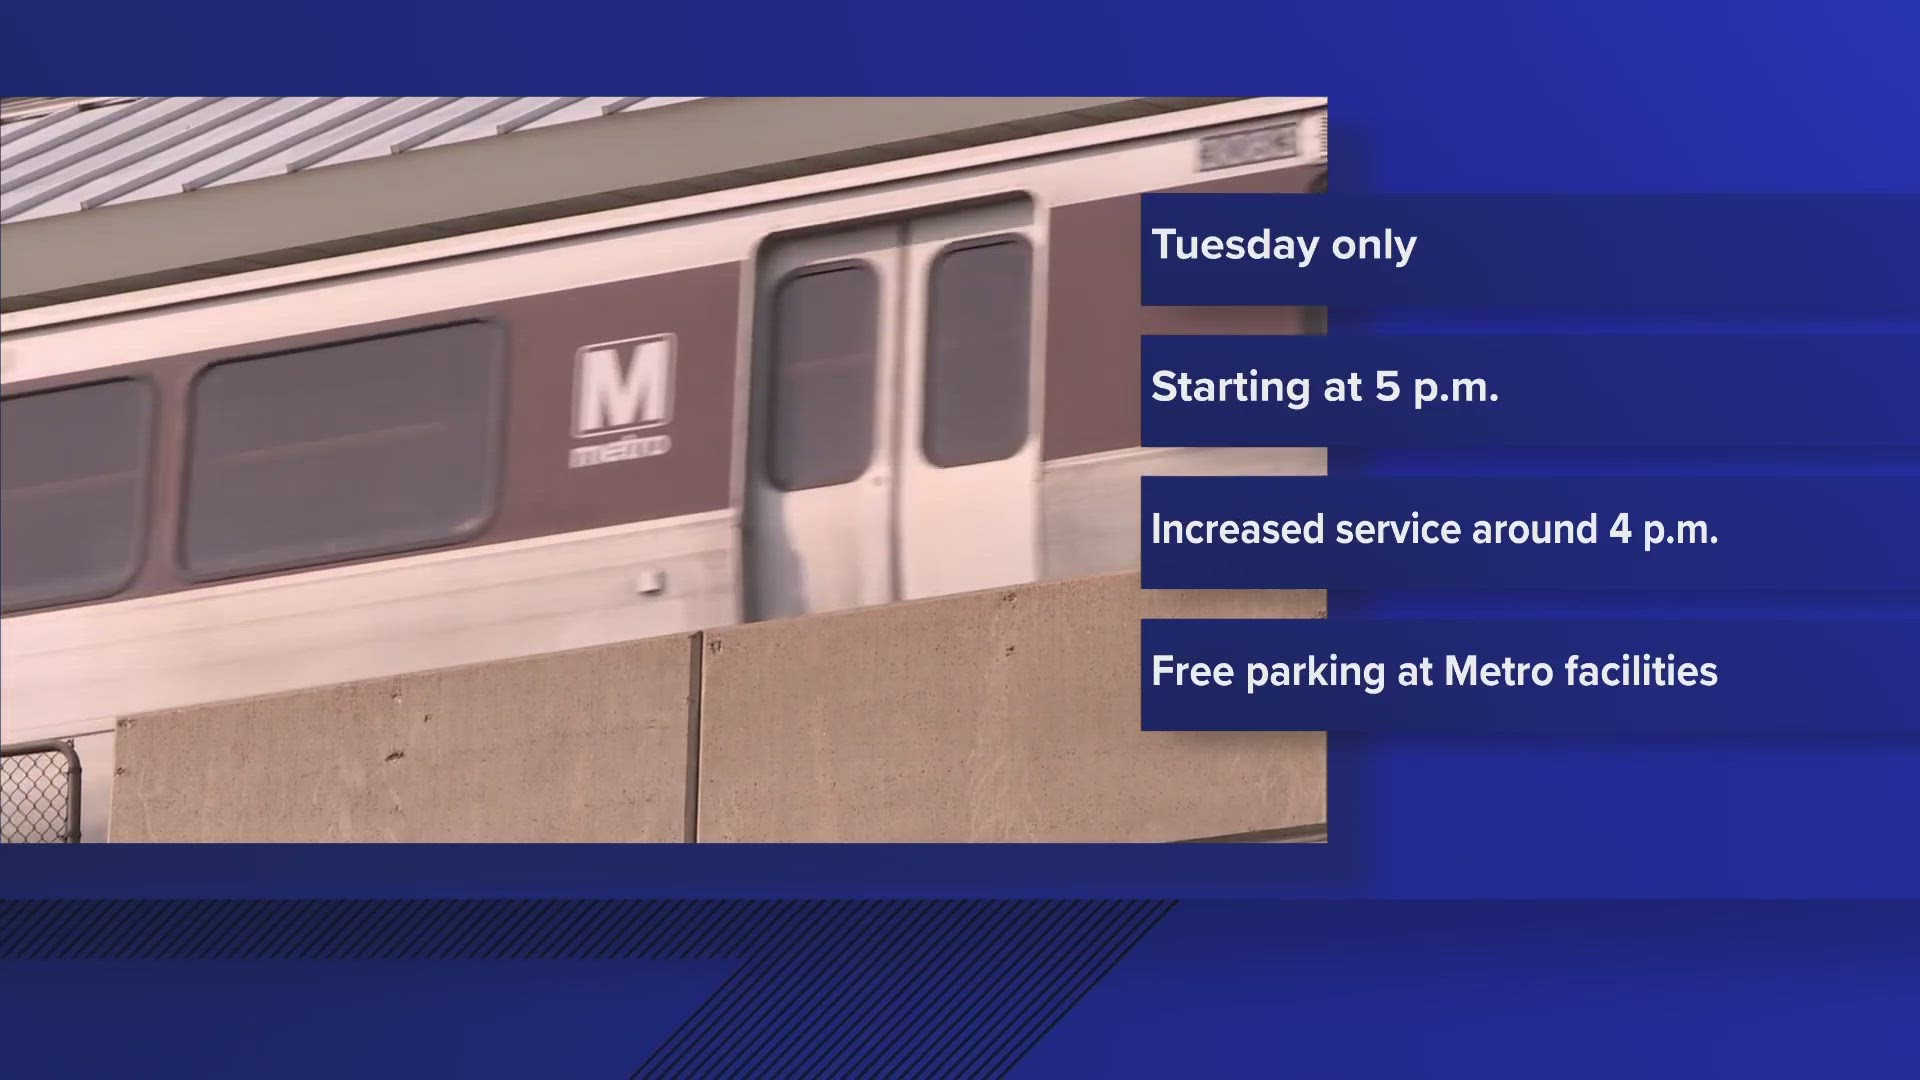 Parking will be also be free all day at Metro parking facilities and garages.